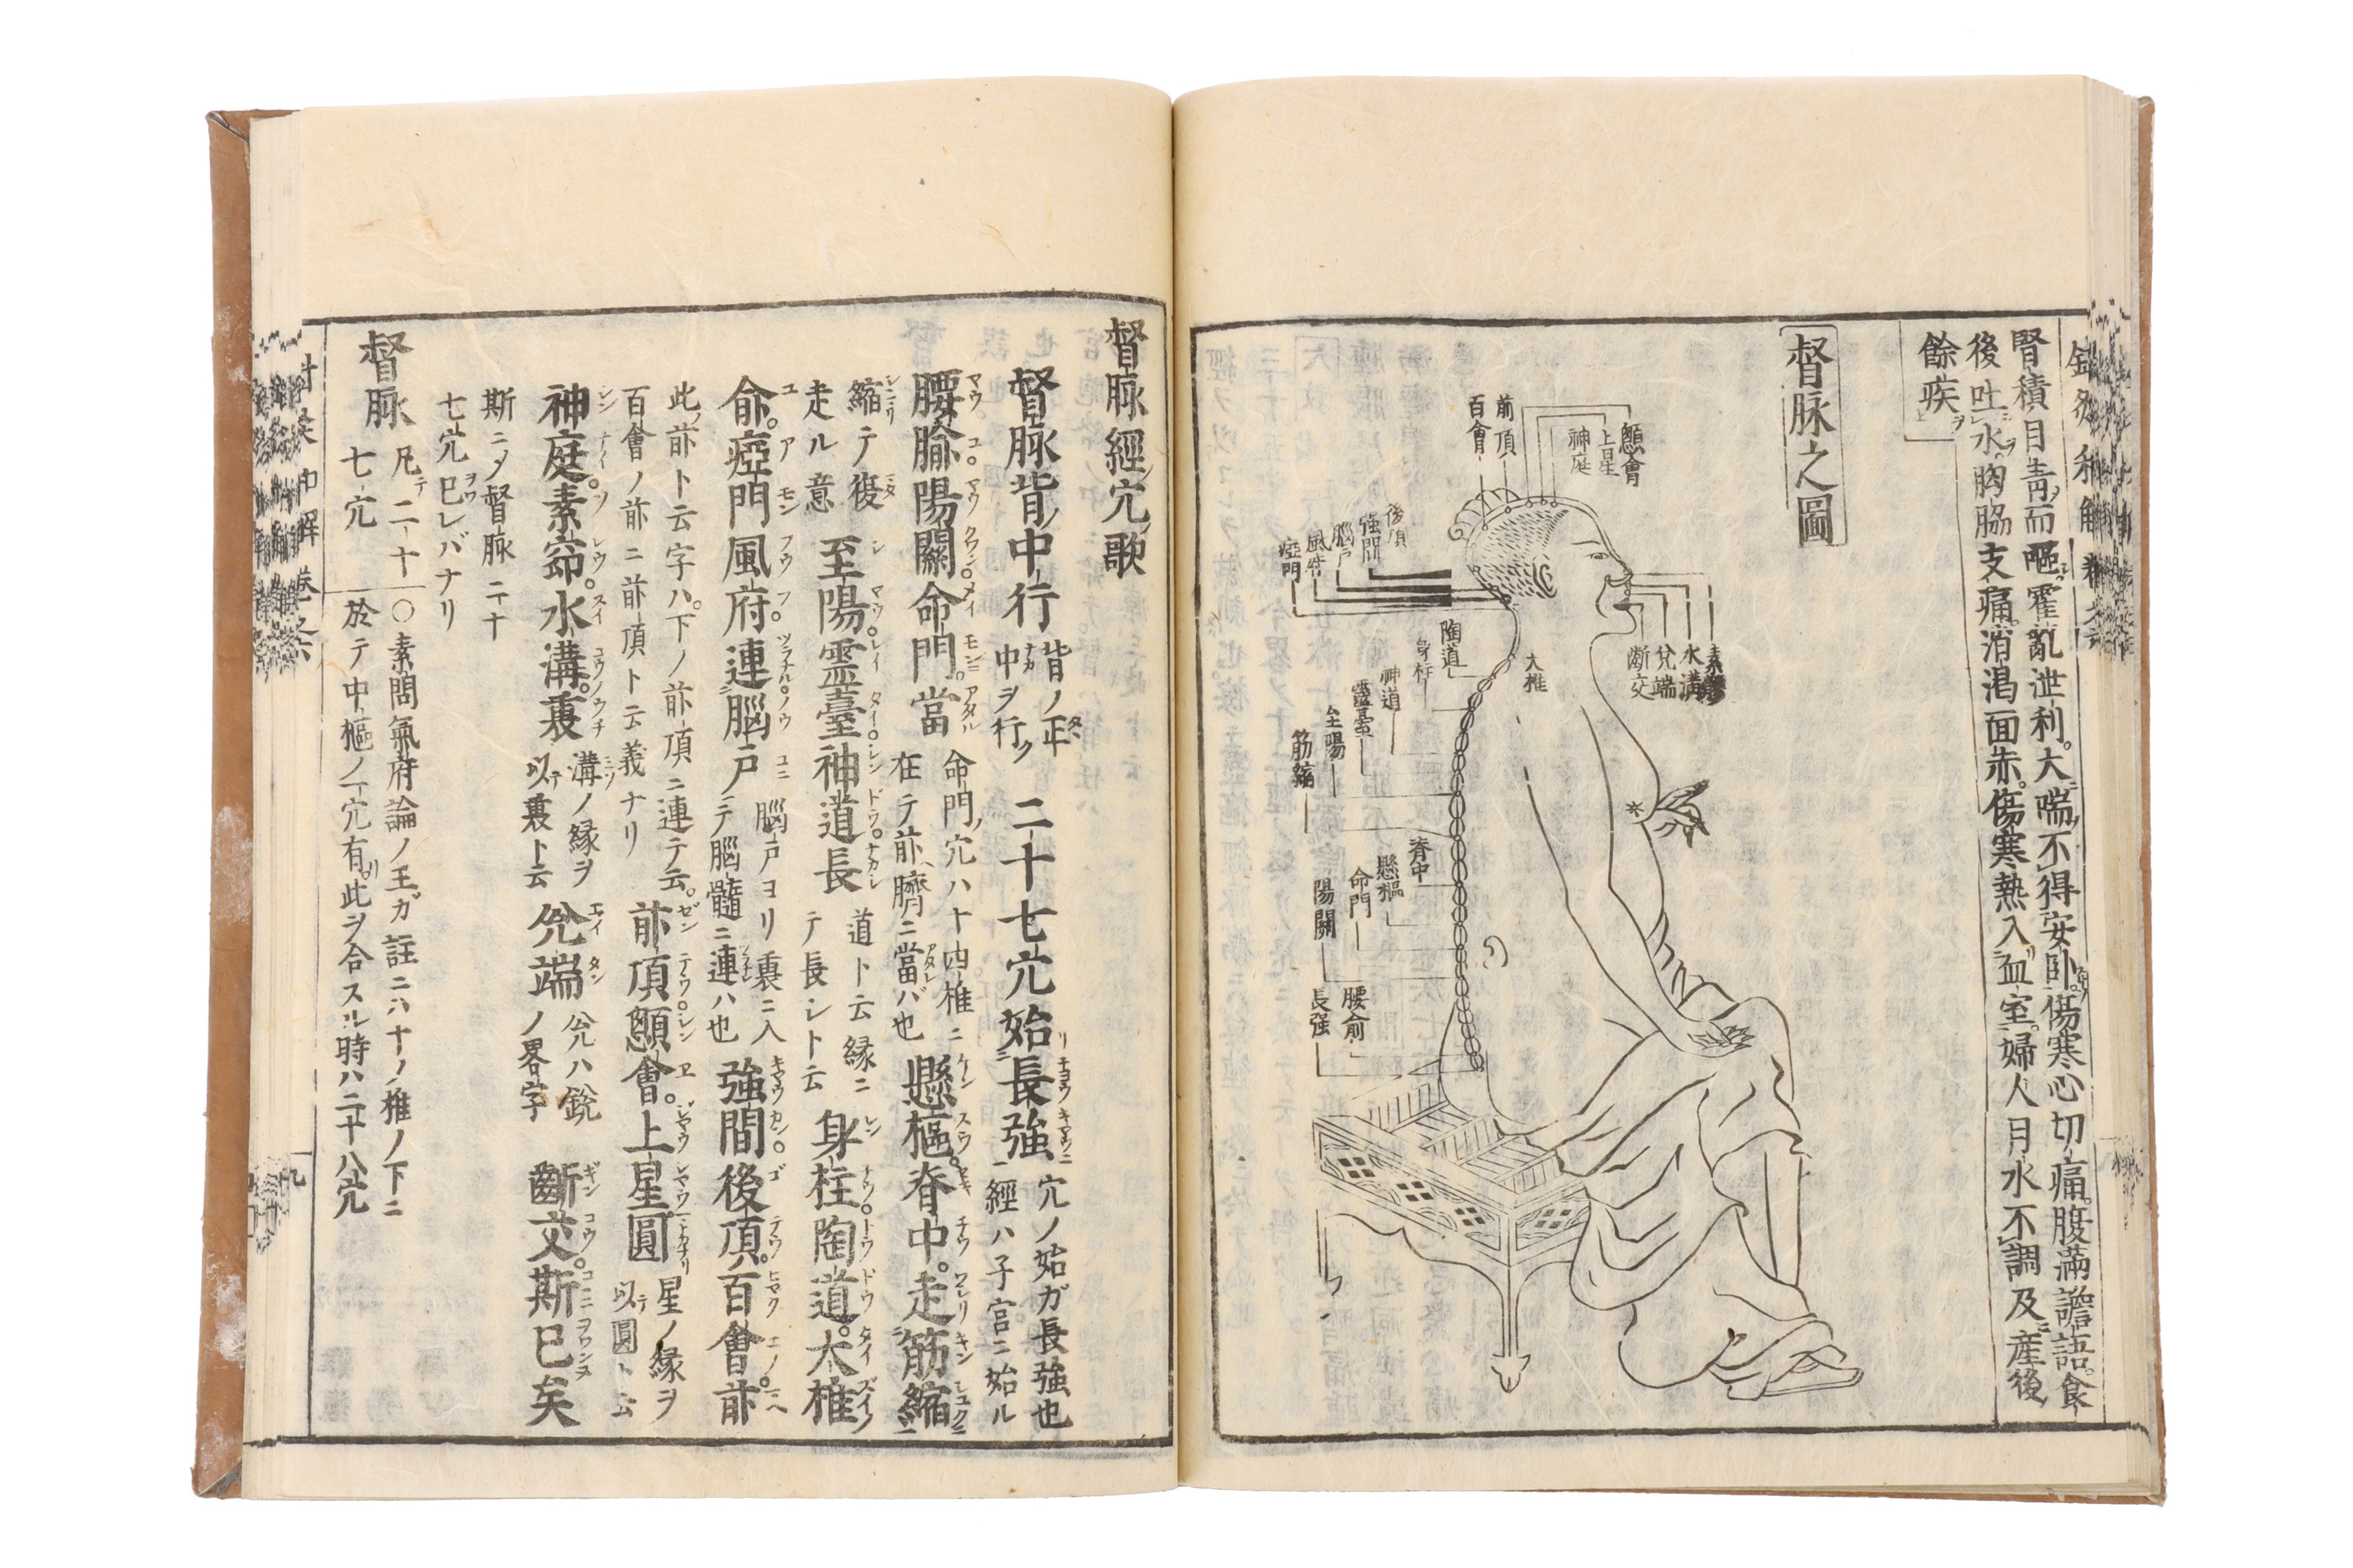 Japanese Woodblock Printed Book on Chinese Medicine - Image 5 of 5